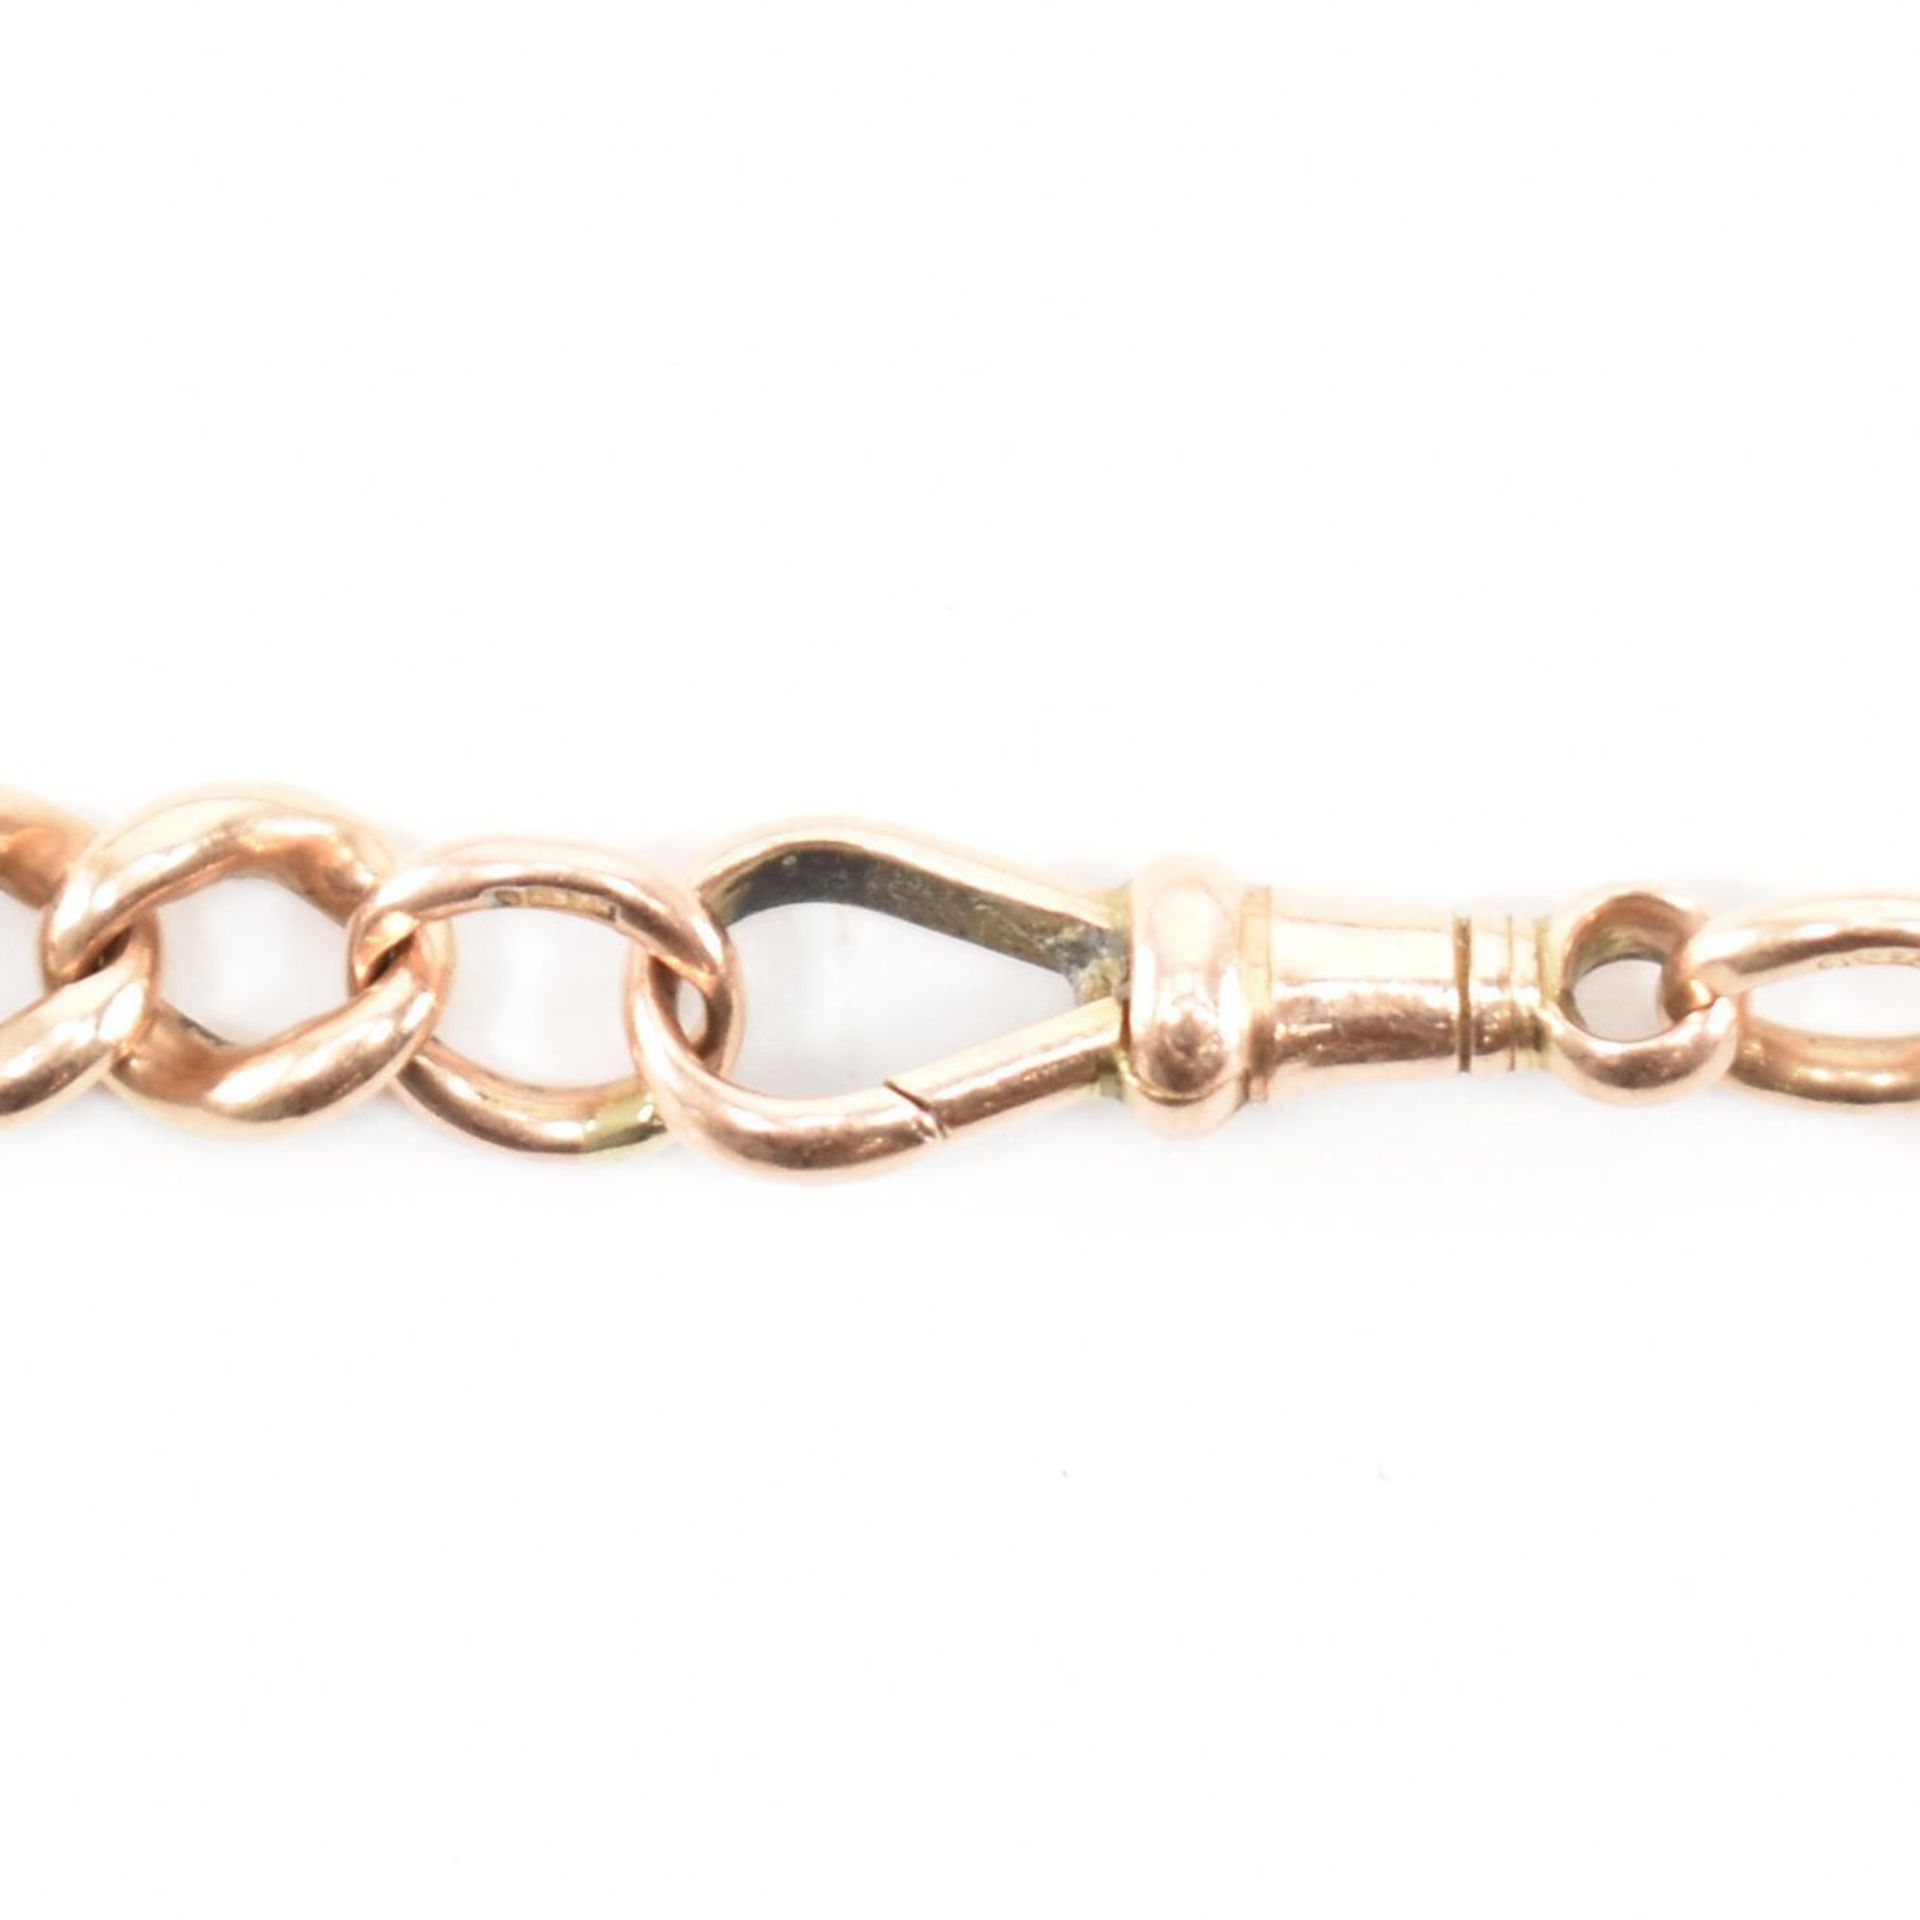 9CT ROSE GOLD WATCH CHAIN BRACELET - Image 3 of 3